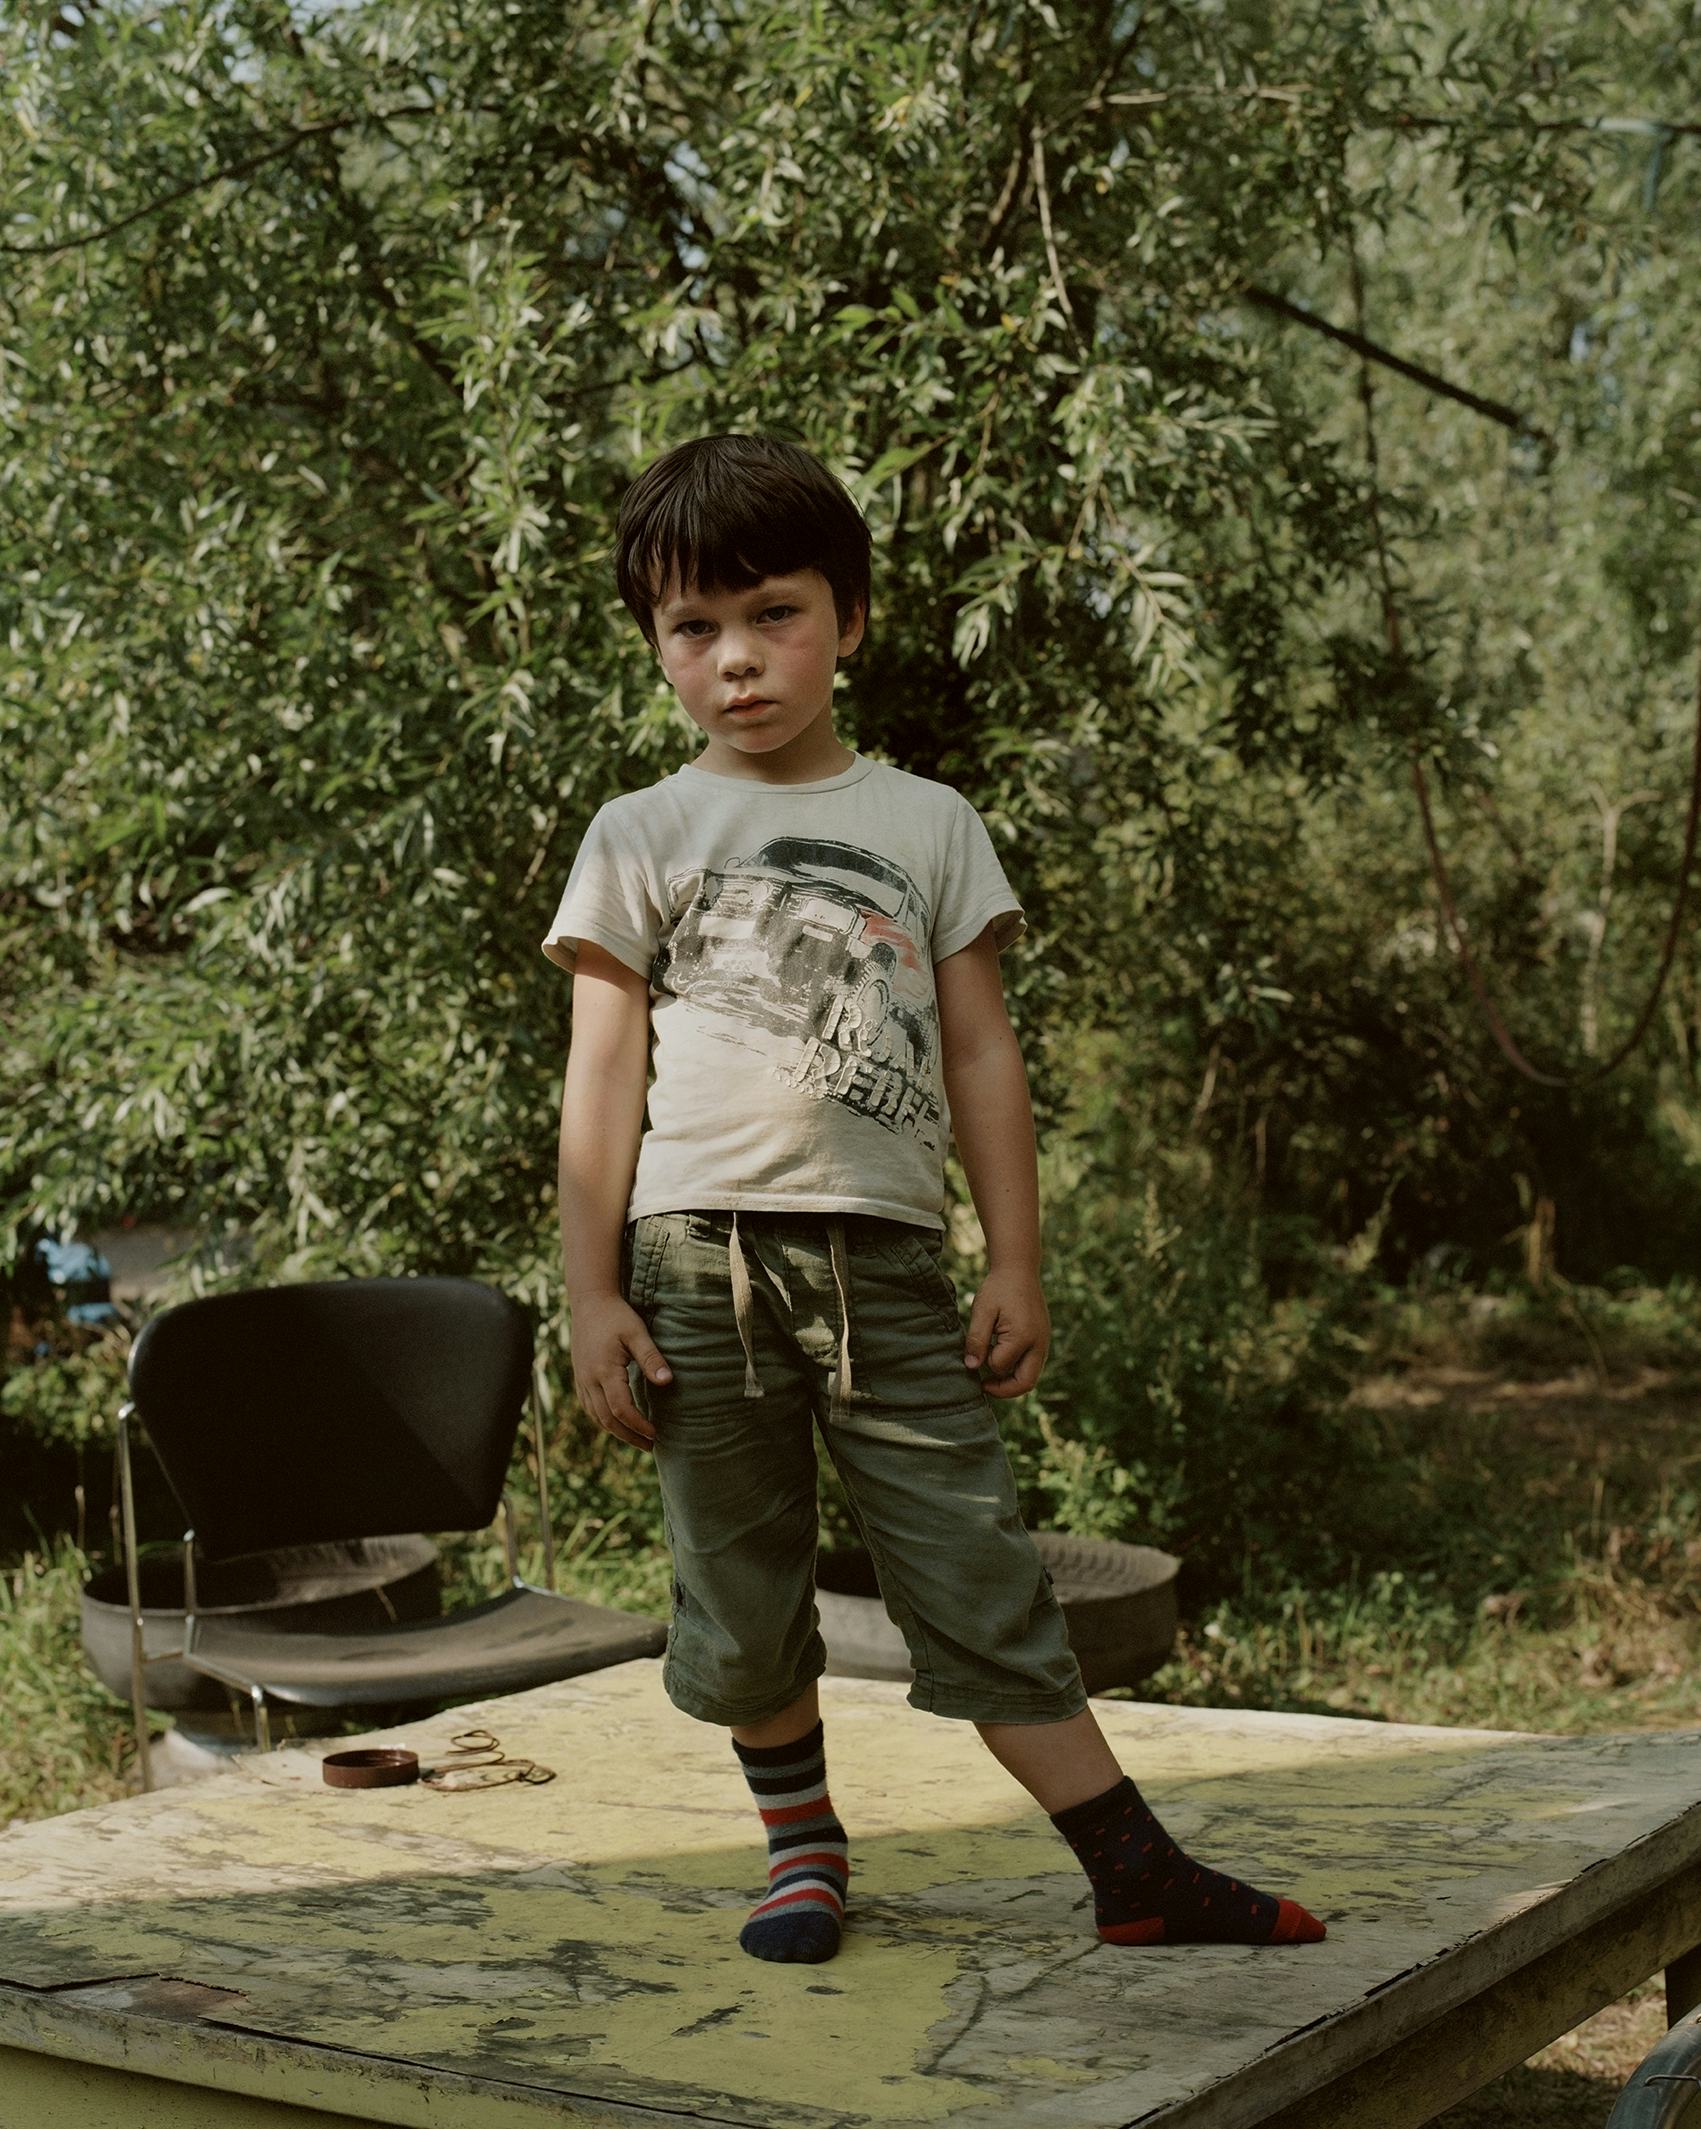 Little boy with brown hair and two different socks standing on a table in nature